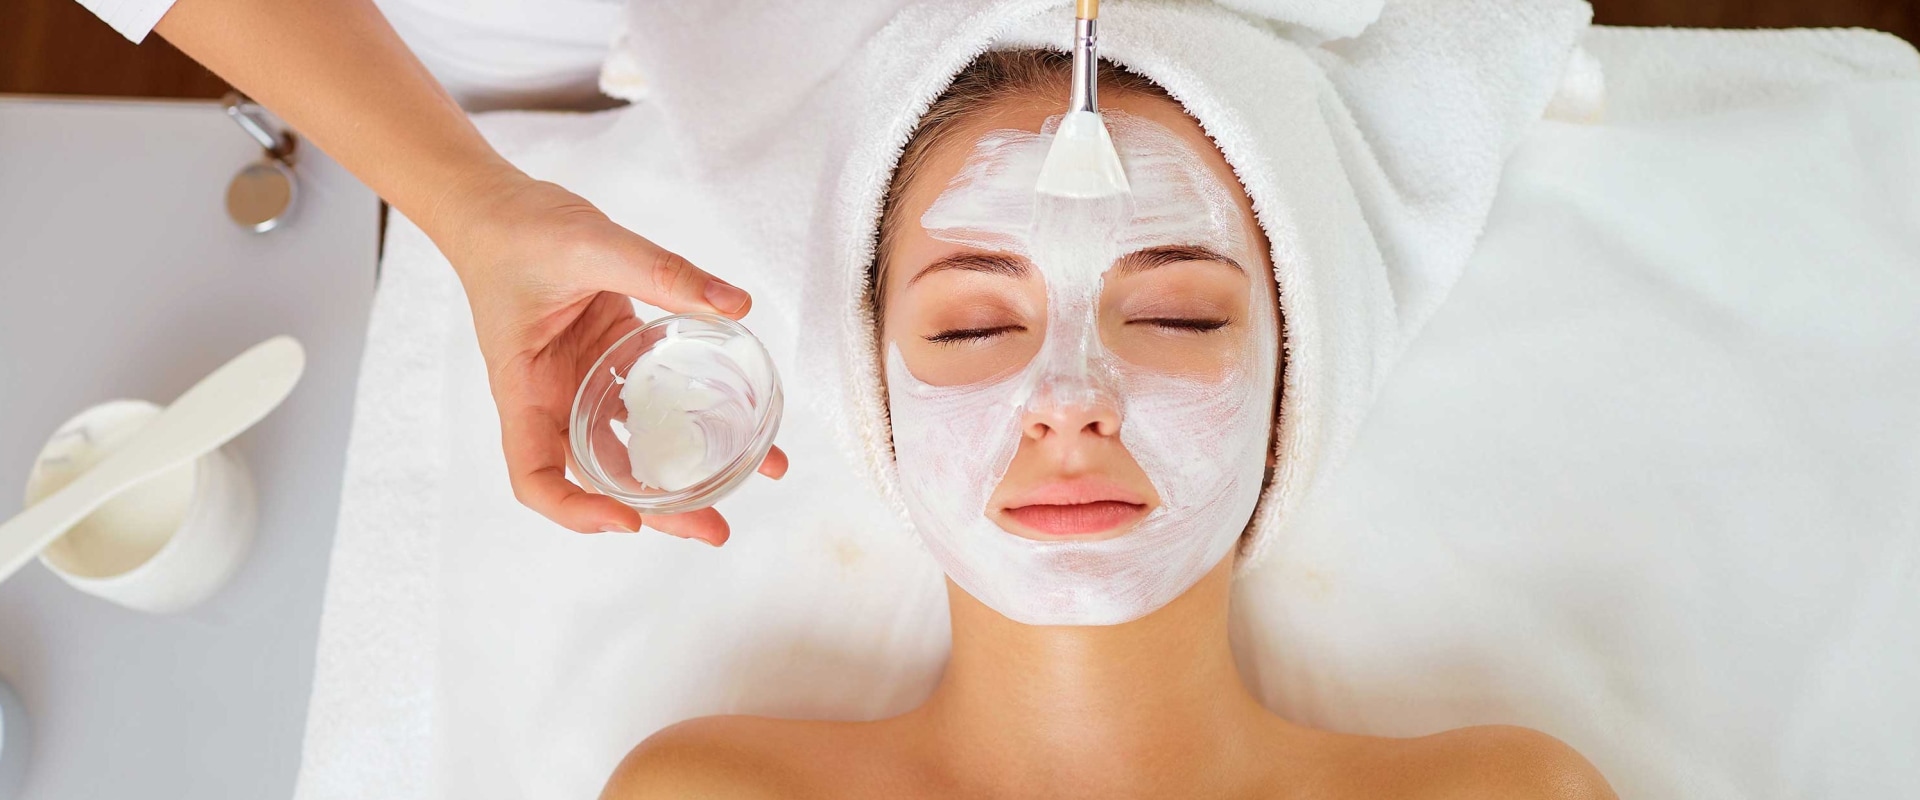 16 Reasons Why You Should Get a Professional Facial Treatment Today